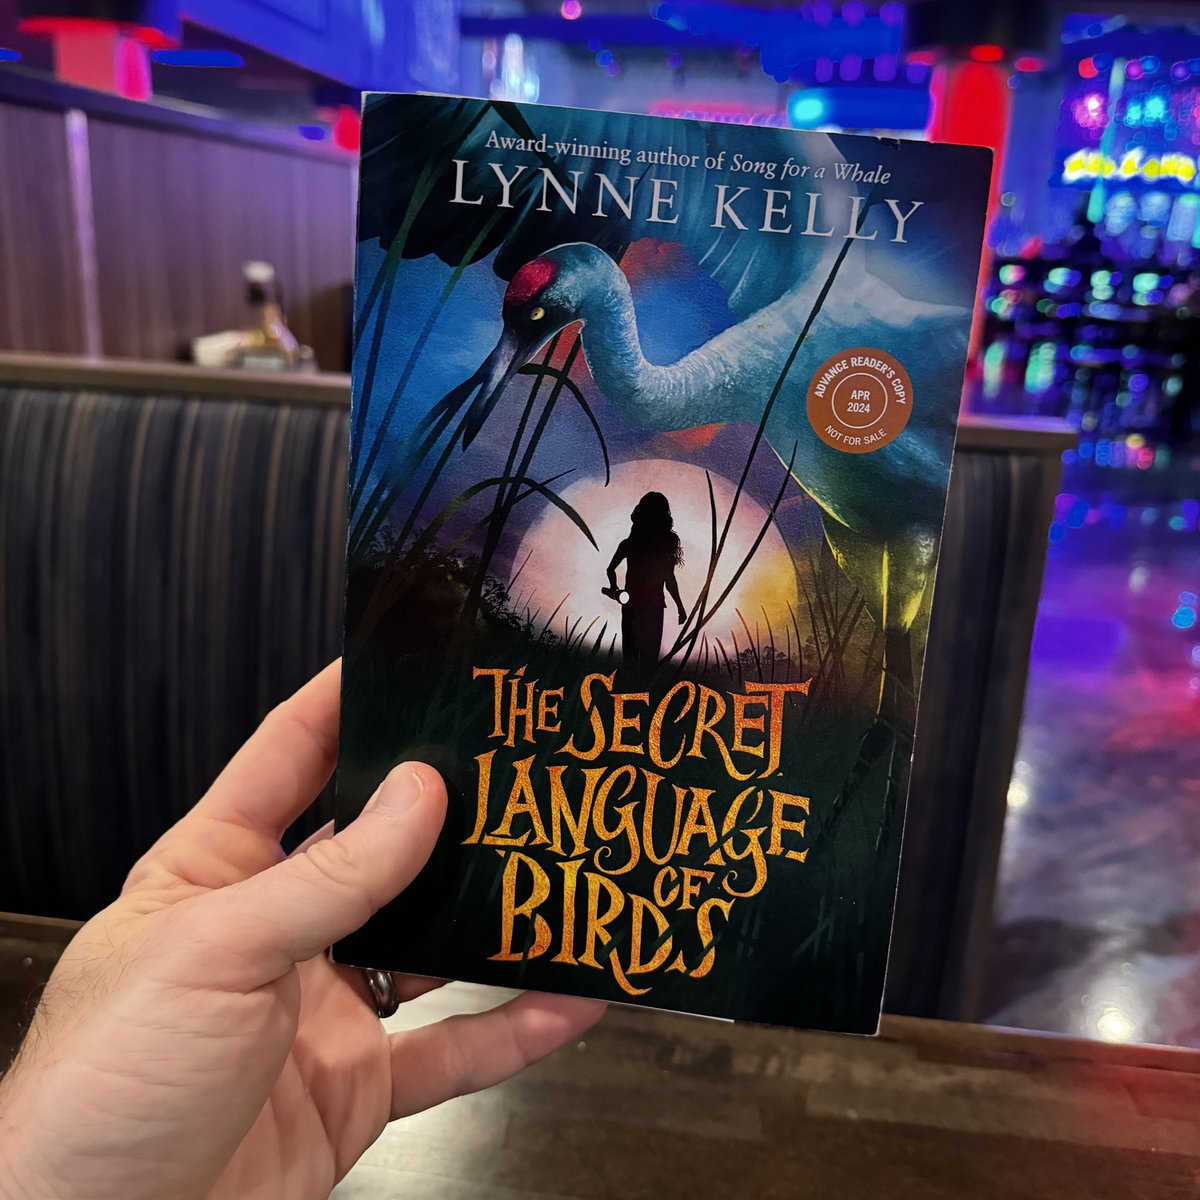 Just finished Lynne Kelly’s new middle grade novel THE SECRET LANGUAGE OF BIRDS. Loved this companion to Lynne’s SONG FOR A WHALE. Readers are going to love getting to know Nina, and hanging out with the Oddballs is a hoot! Book drops 4/9. Be sure to pick up a copy!